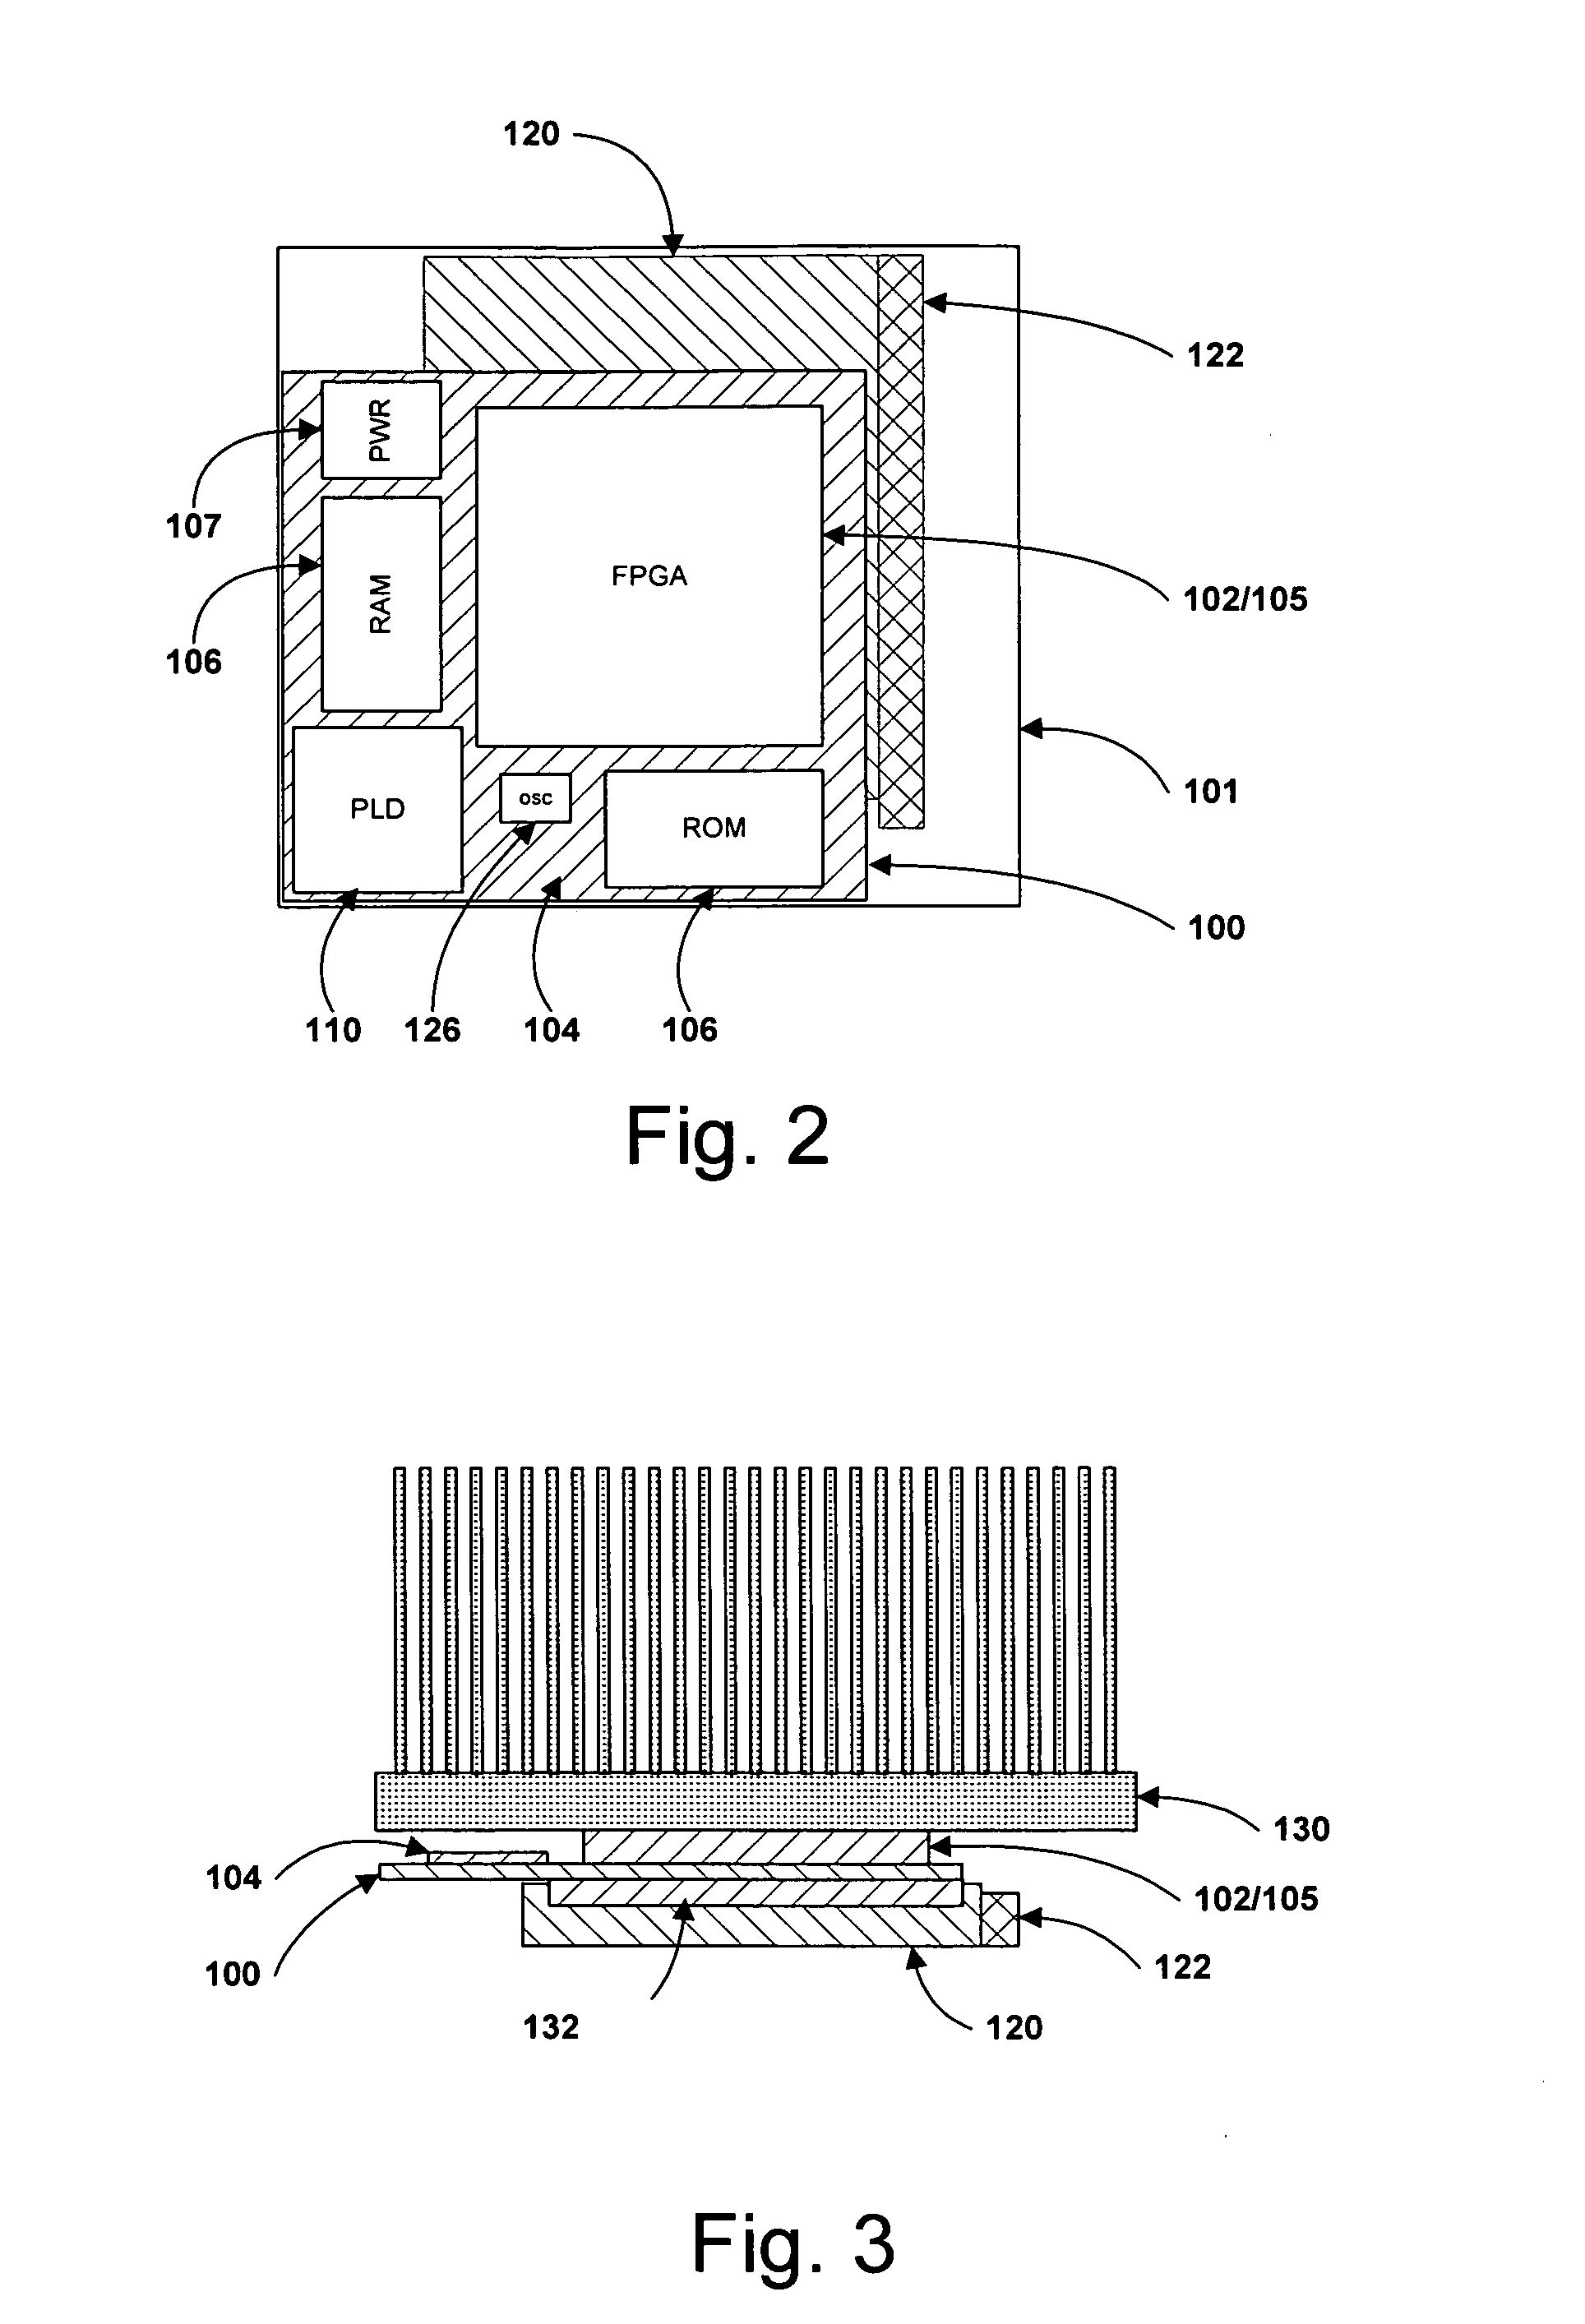 Systems and methods for providing co-processors to computing systems